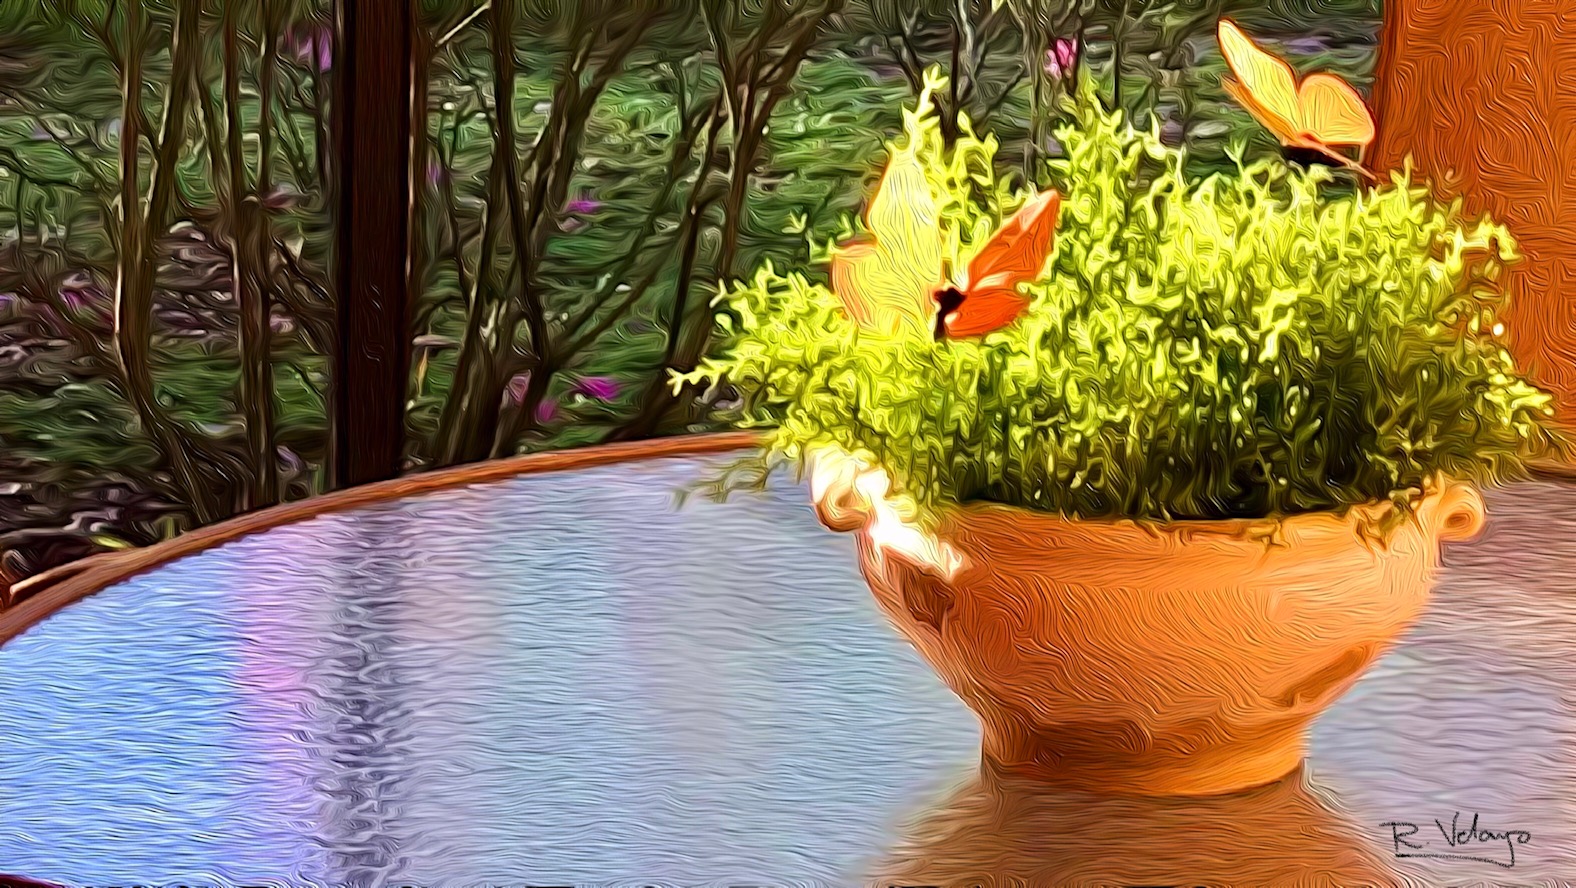 "POTTED PLANT ON PATIO TABLE" [Created: 2/24/2021]